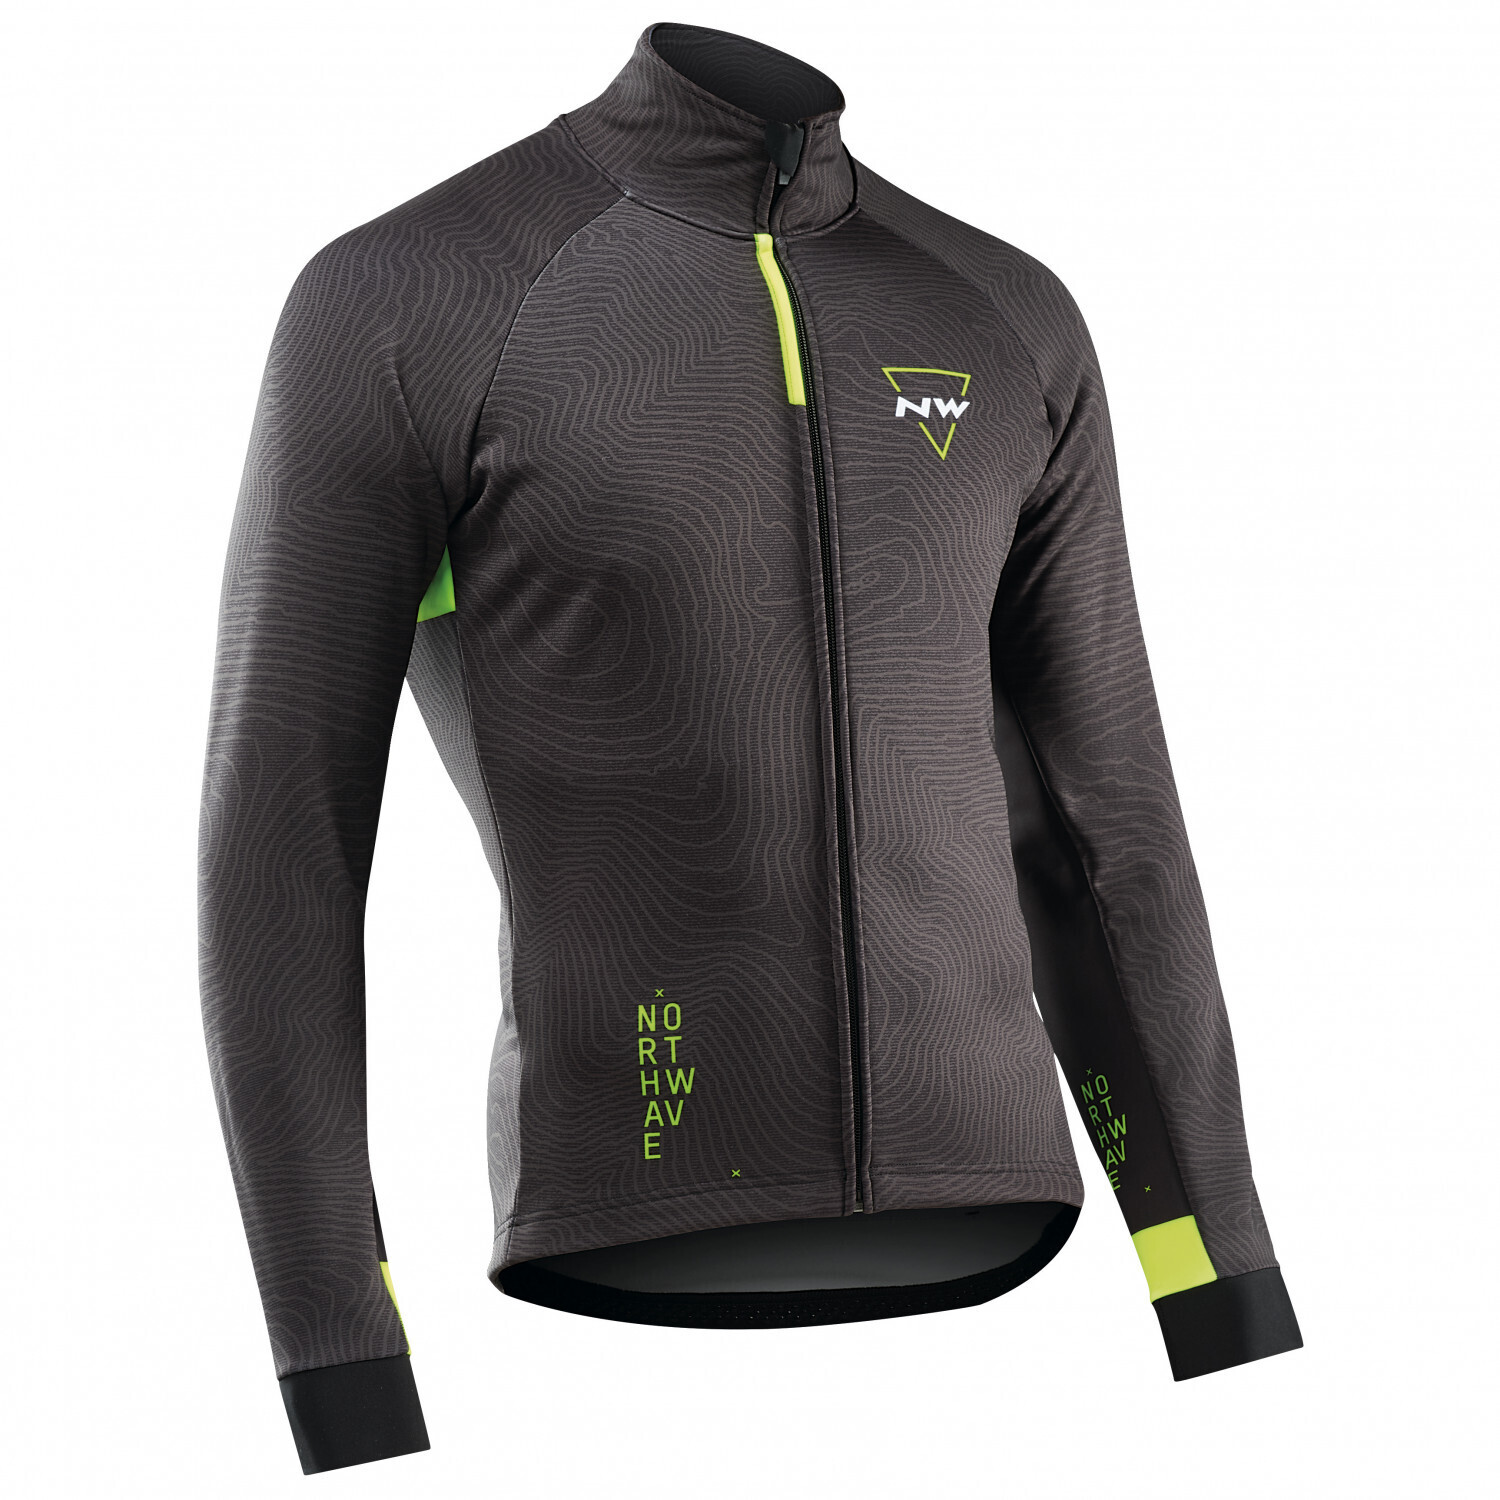 Northwave Blade 3 Jacket  total protection Black Yellow fluo